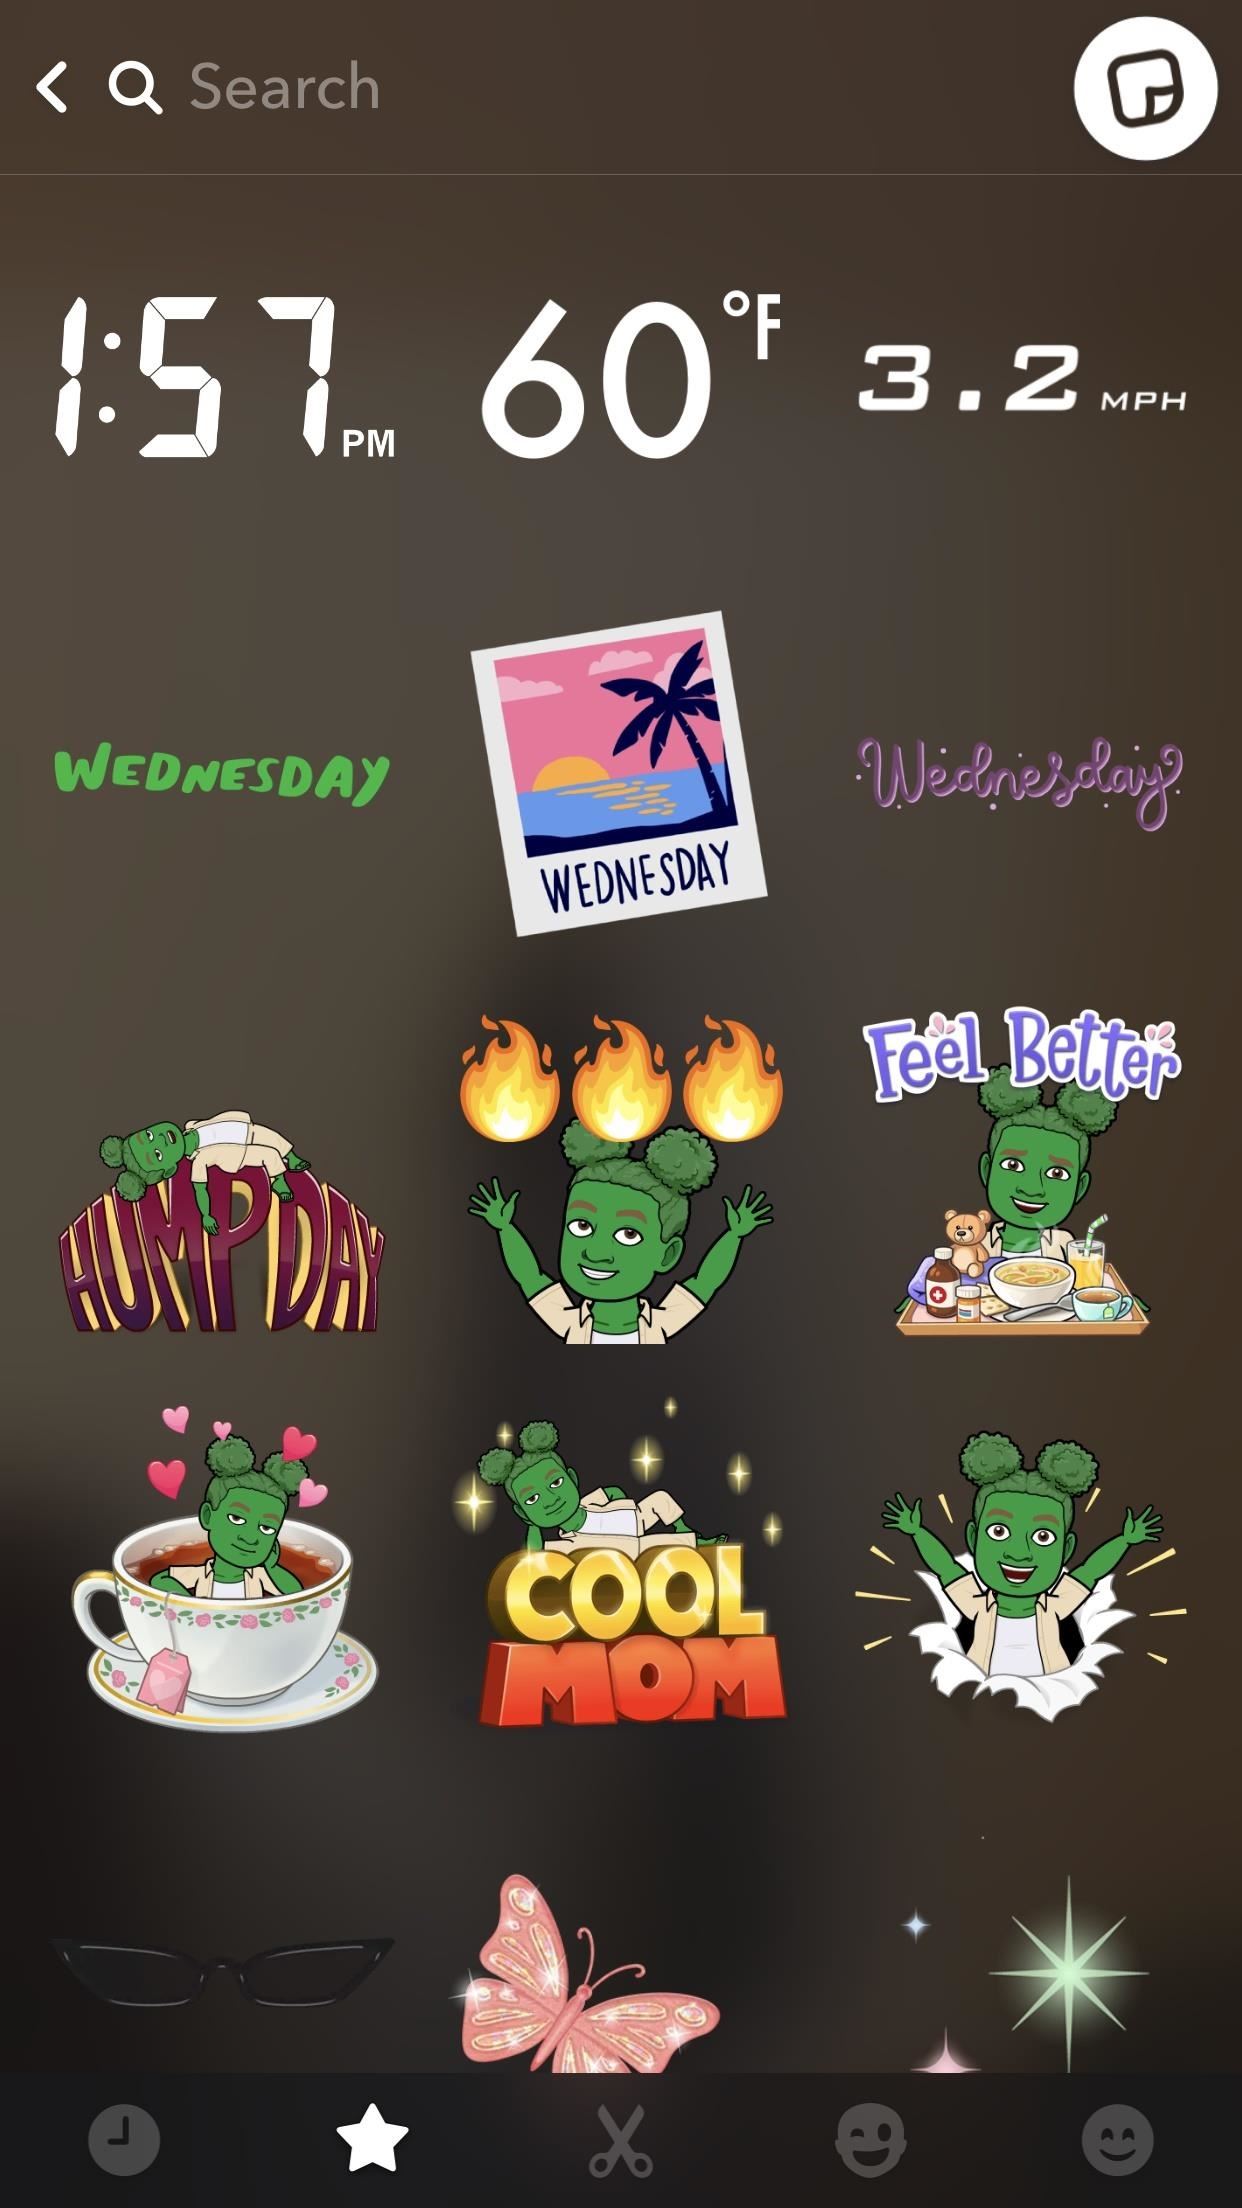 Pin Snapchat Stickers & GIFs So They Stay Put or Follow Subjects in Videos